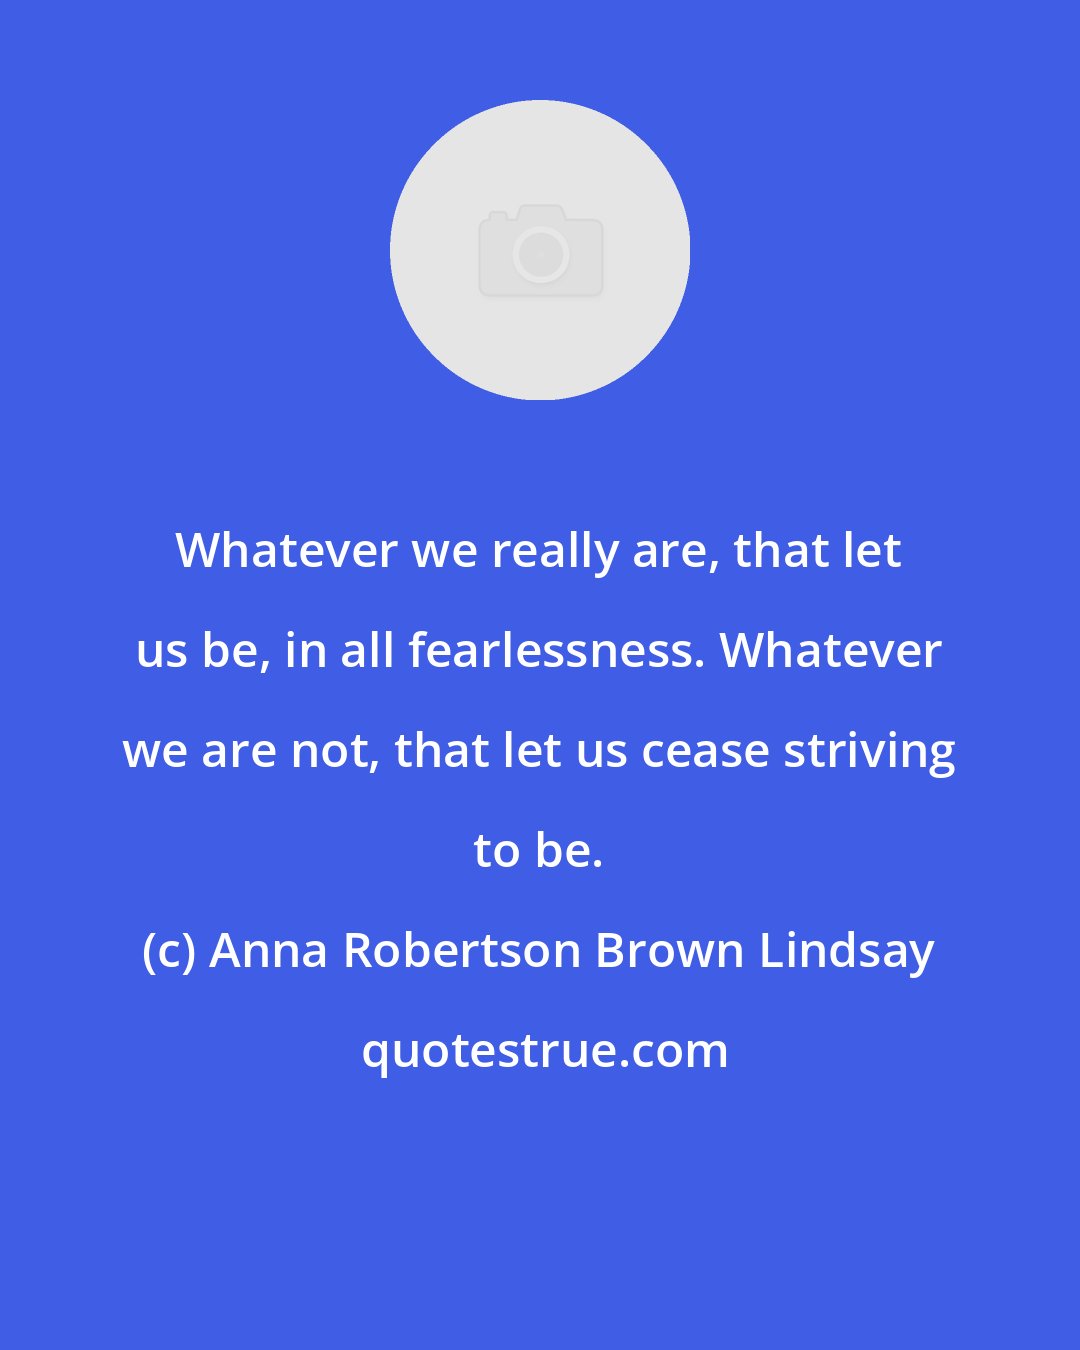 Anna Robertson Brown Lindsay: Whatever we really are, that let us be, in all fearlessness. Whatever we are not, that let us cease striving to be.